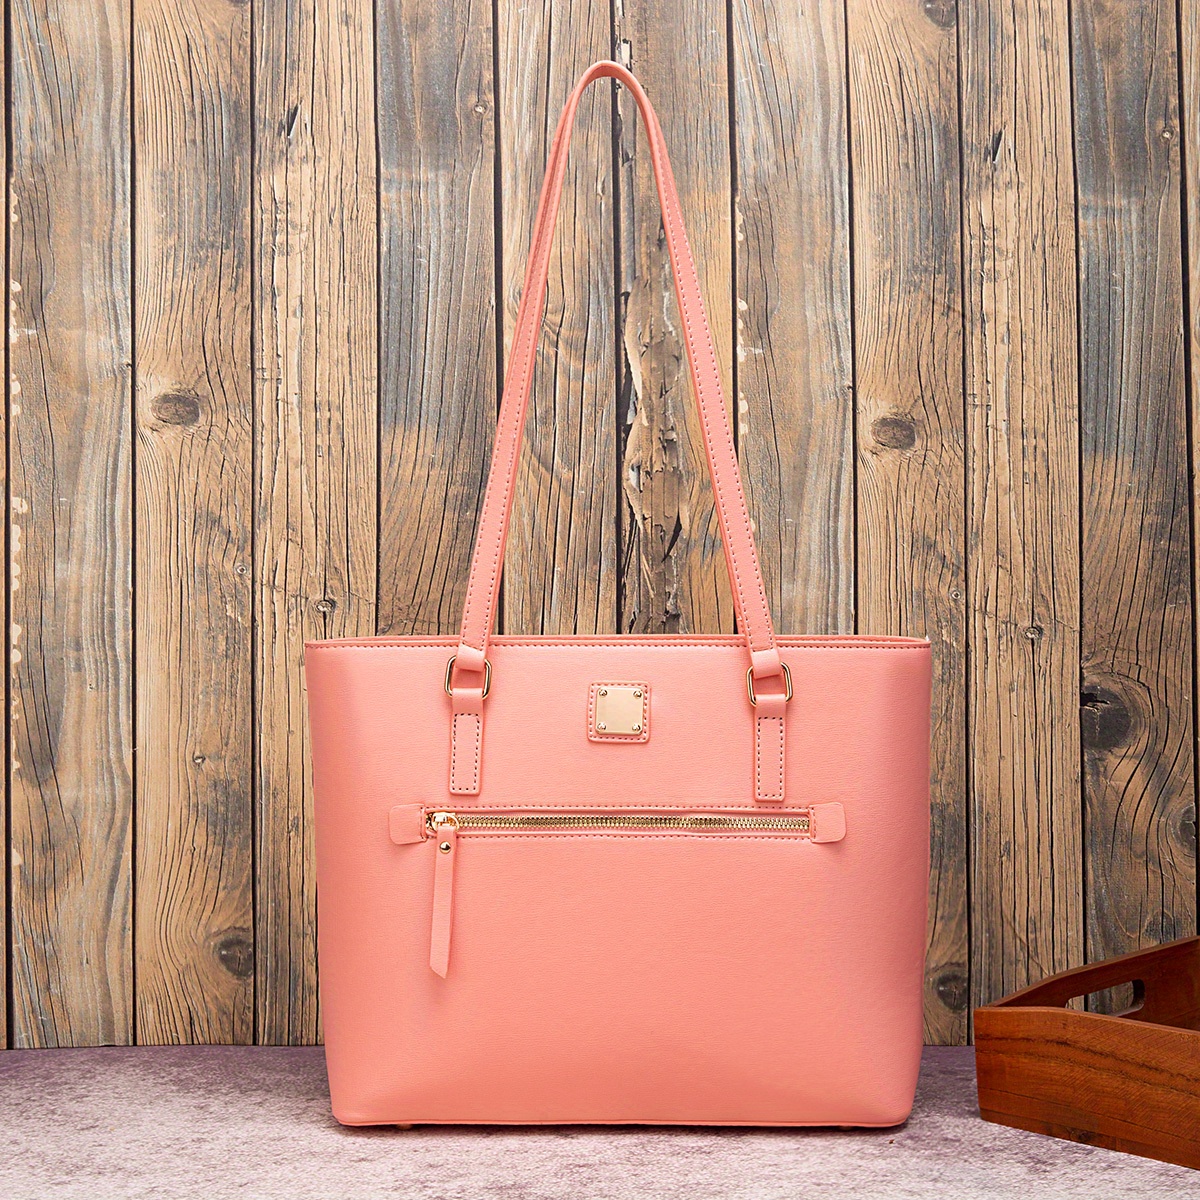 Lacoste Leather Tote bag In Peach Pink Colour